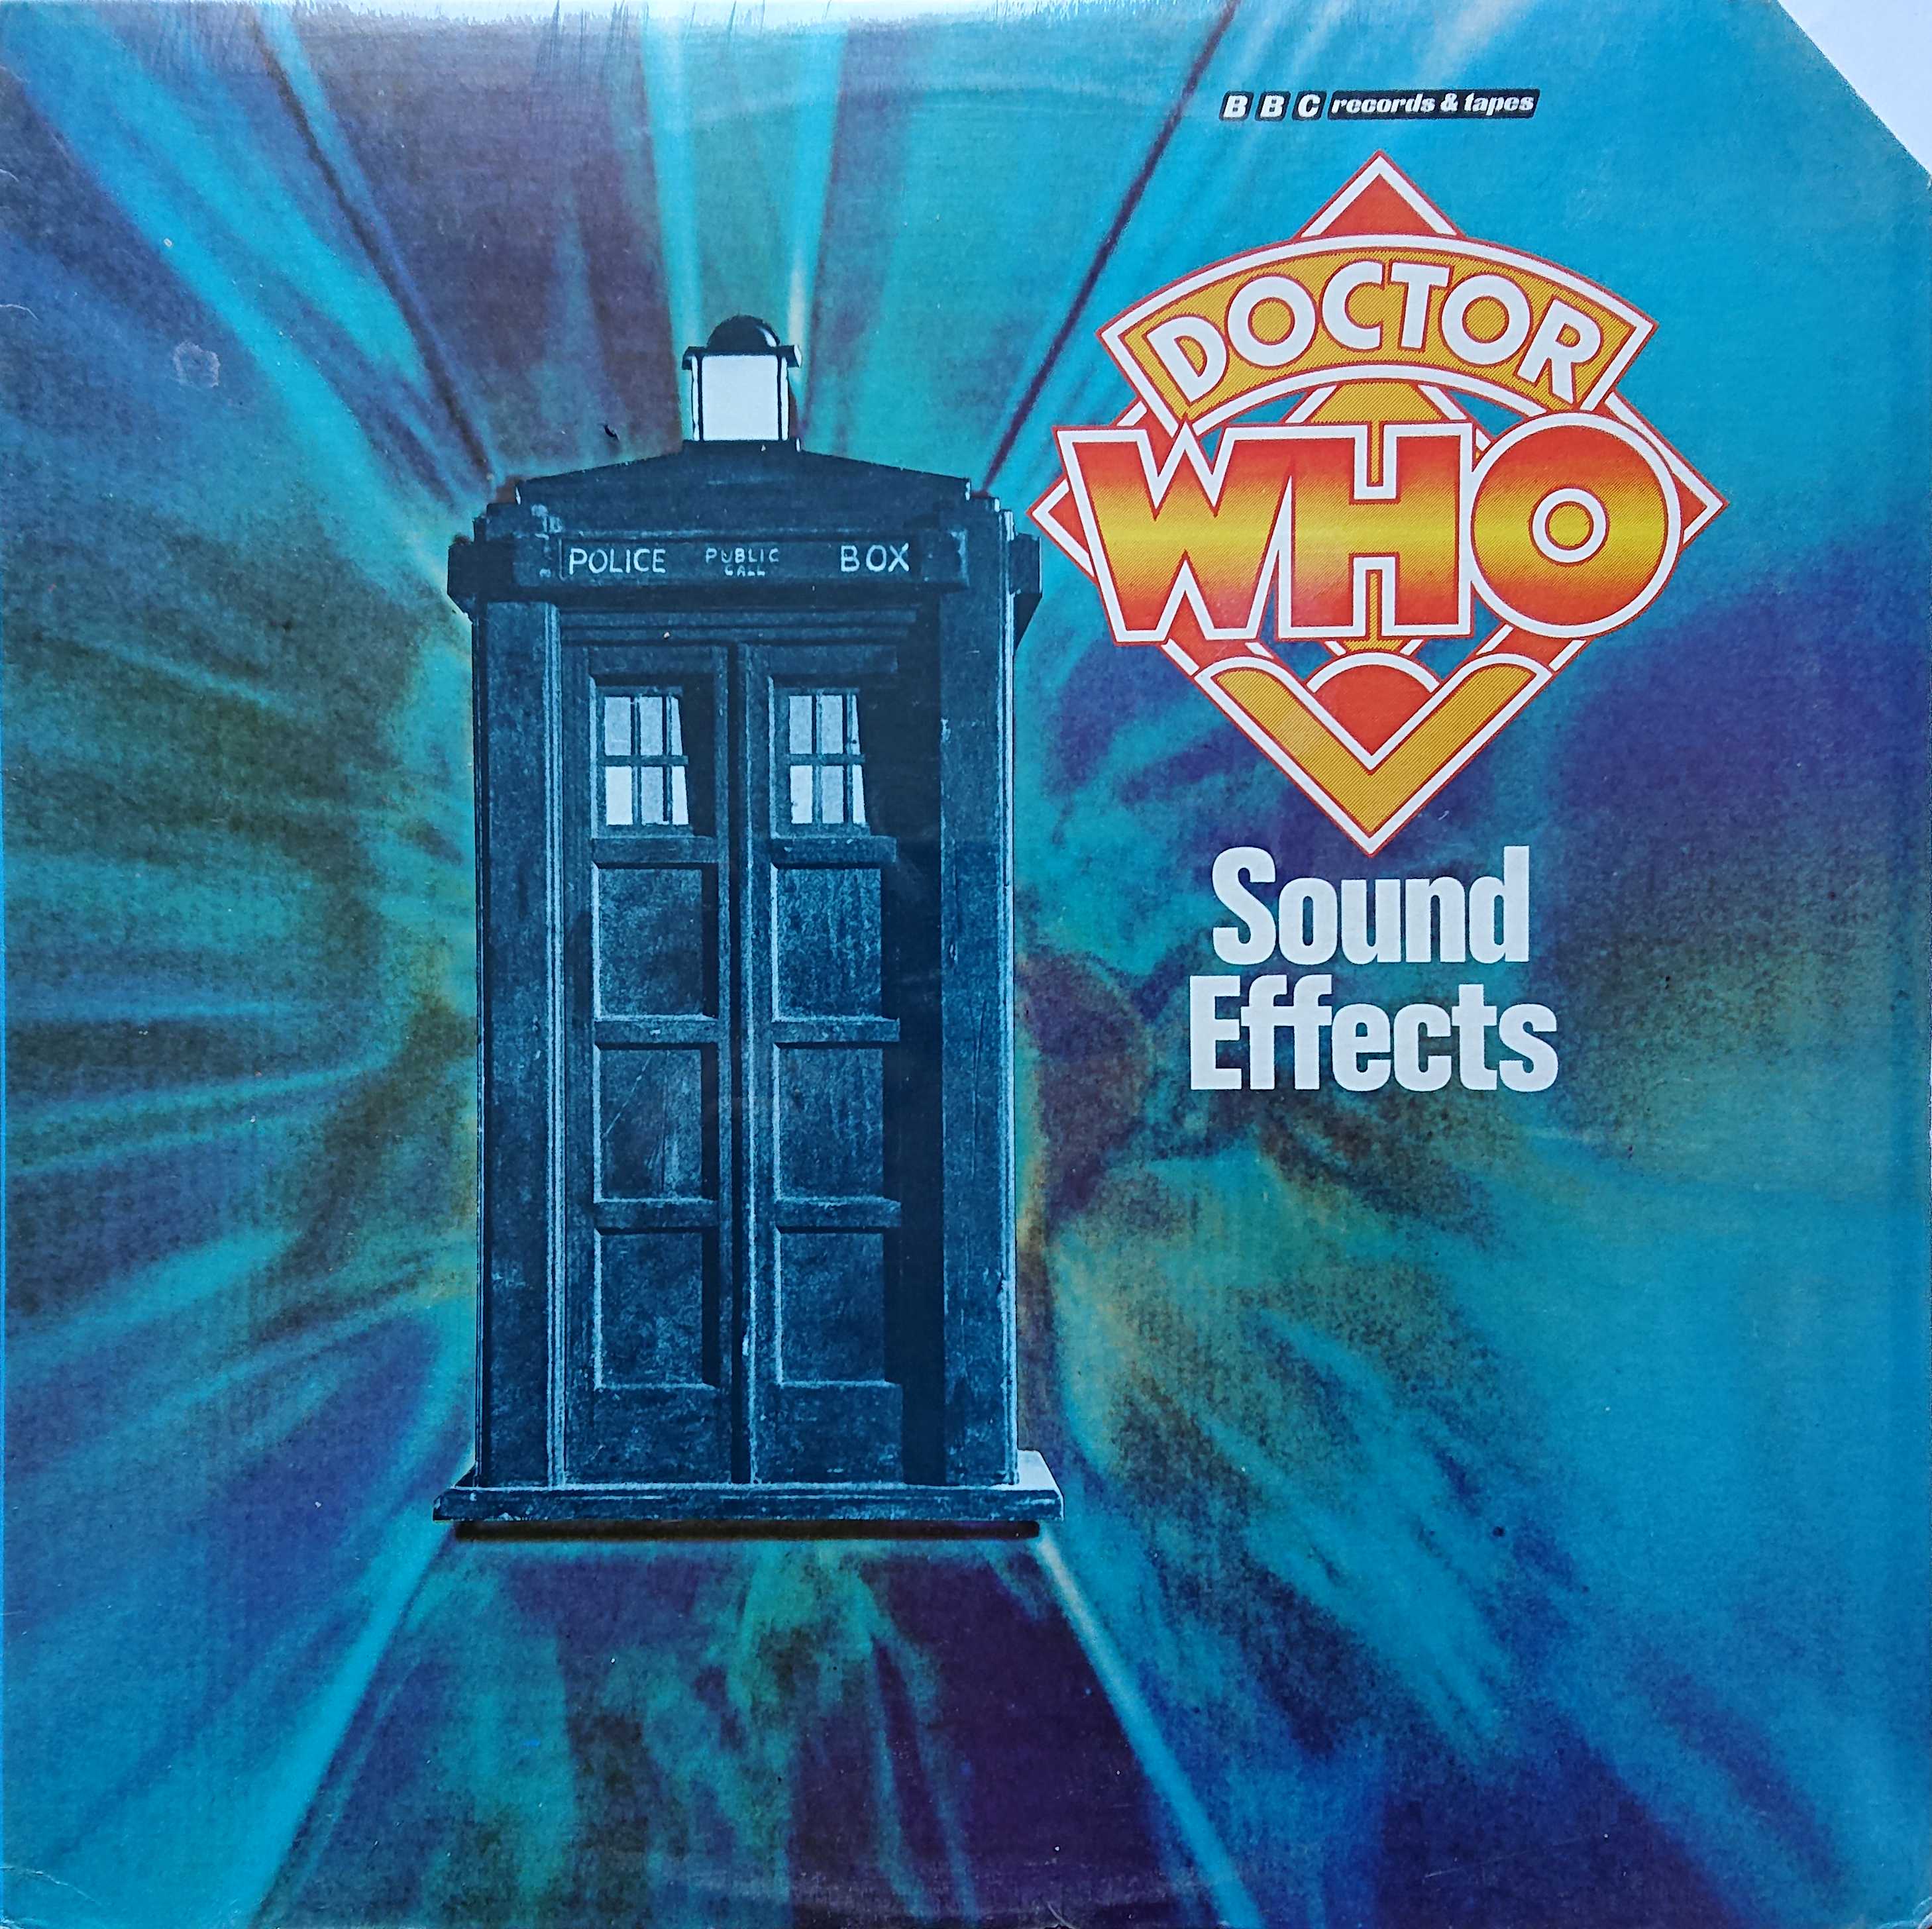 Picture of TRC - 918 Doctor Who sound effects by artist BBC radiophonic workshop from the BBC records and Tapes library